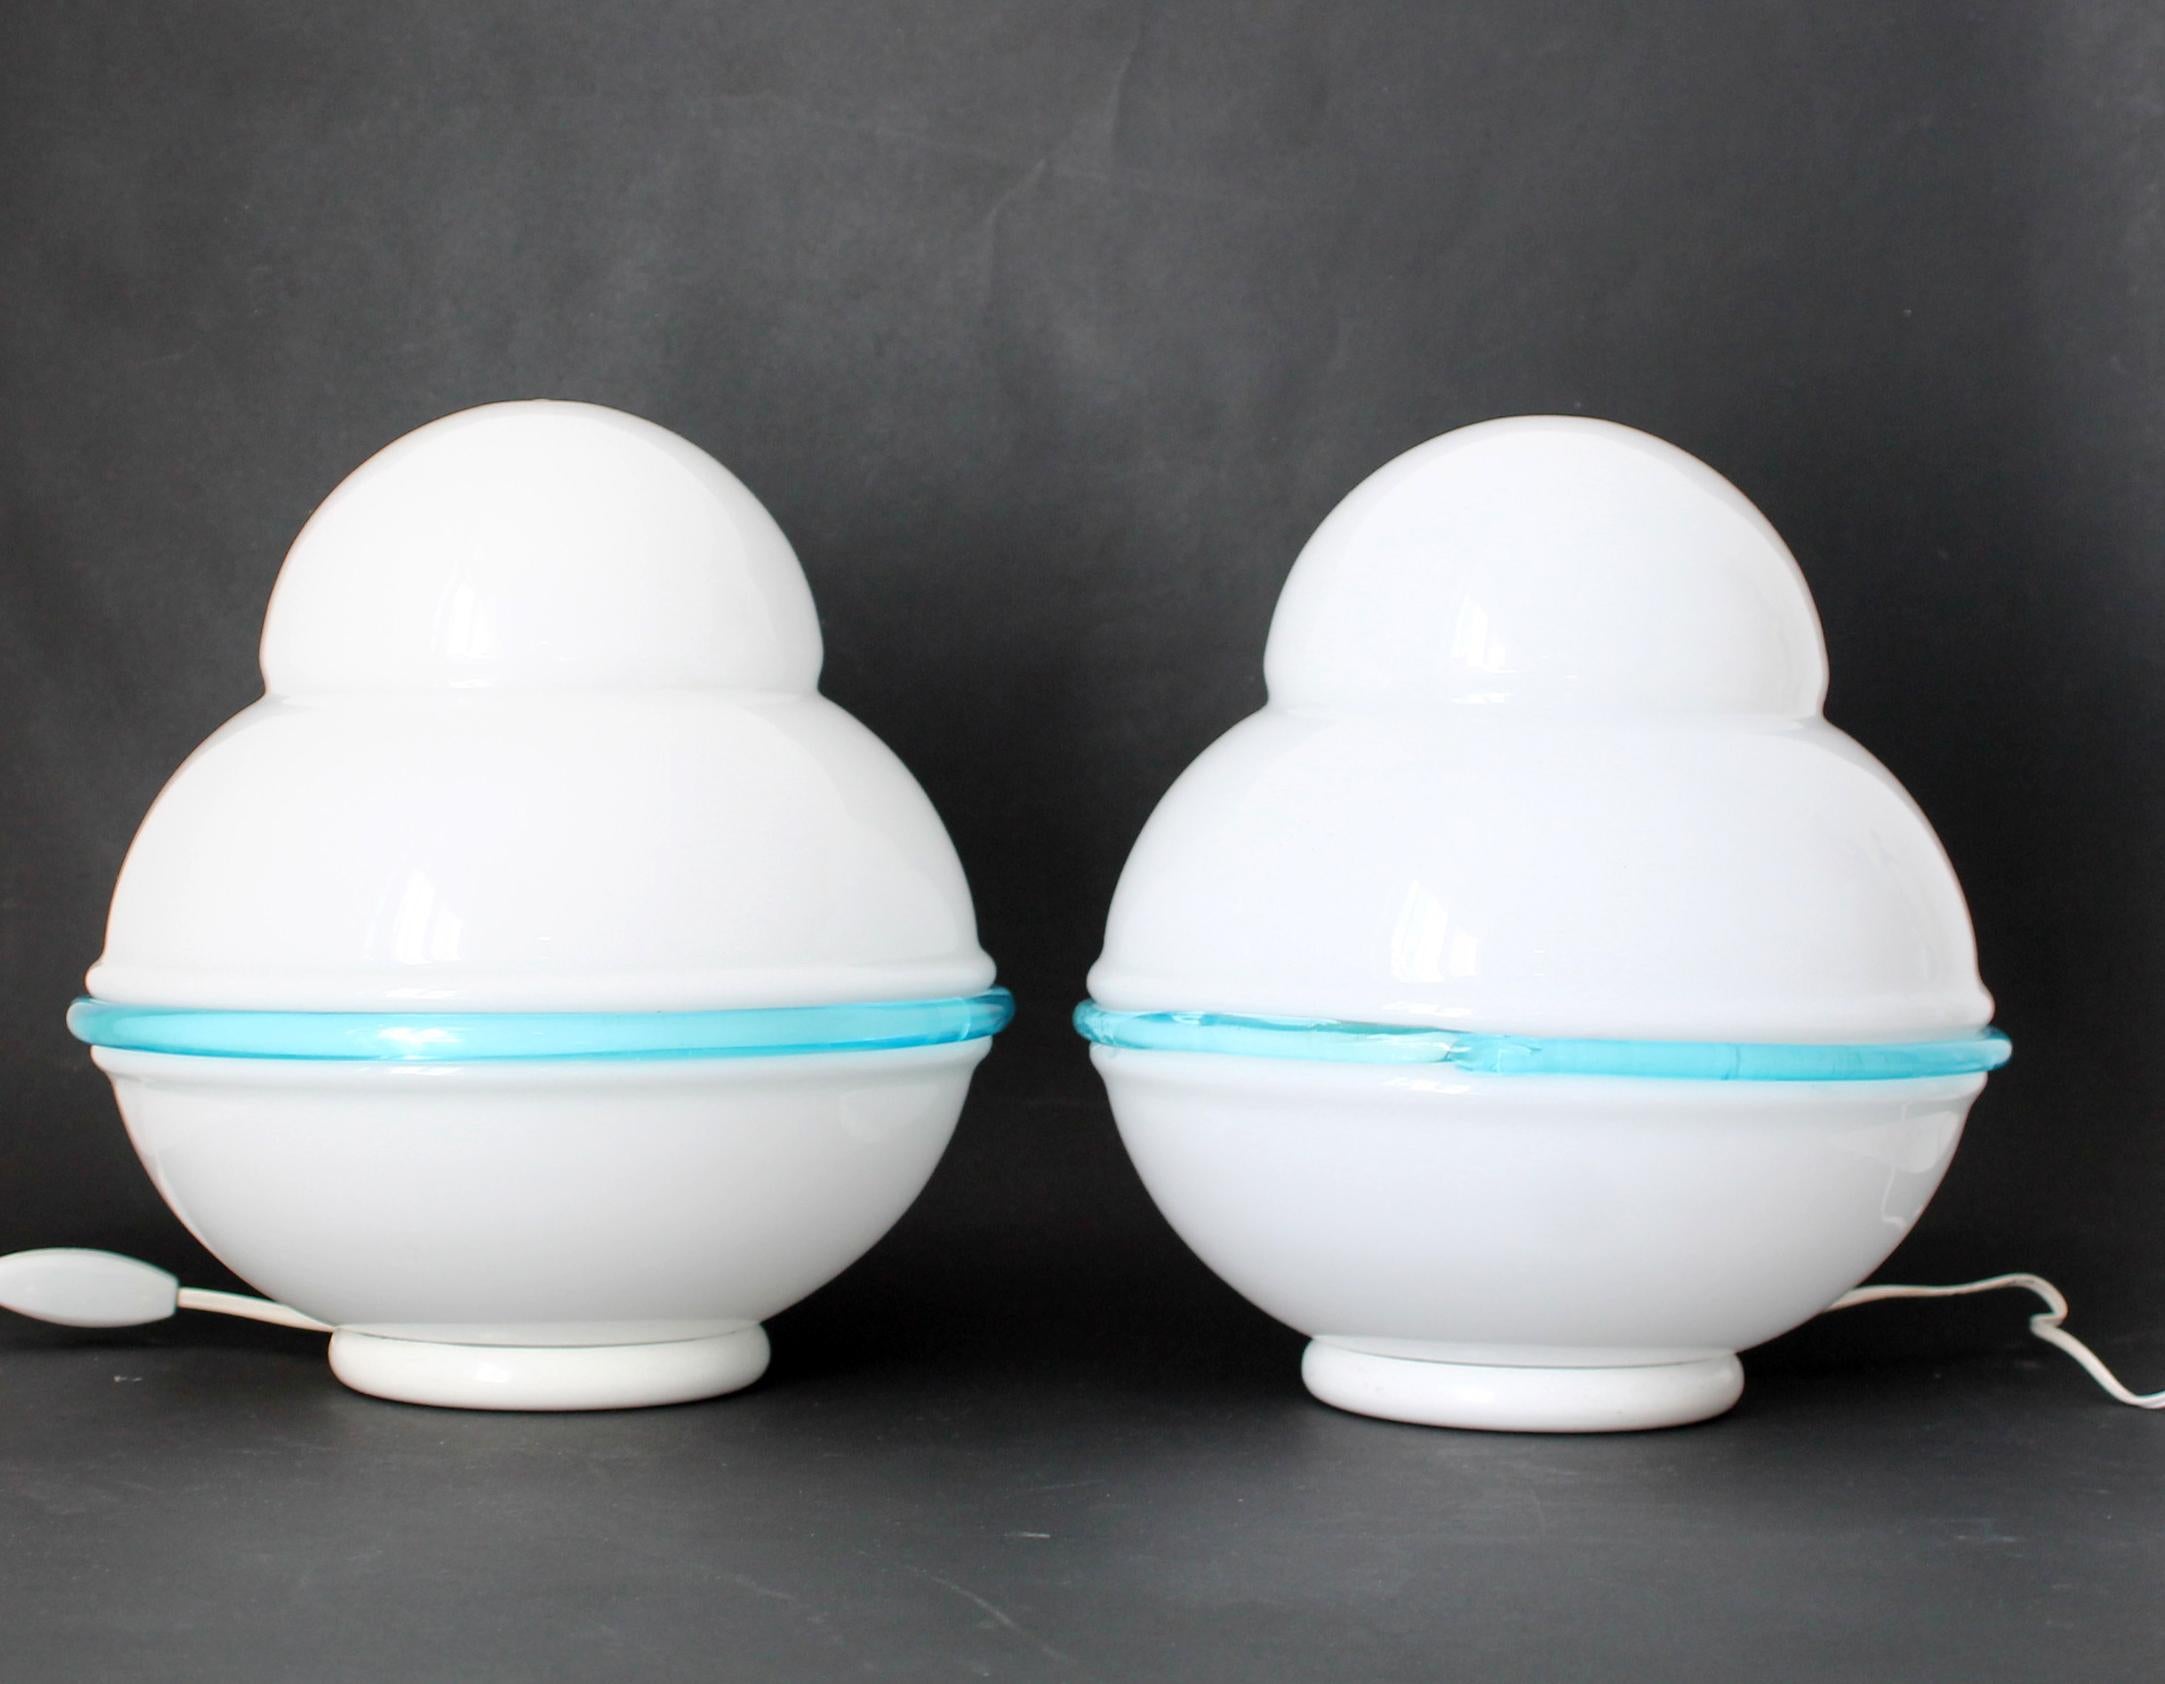 DUO )) original glass lamps by LEUCOS - Handmade in Italy (Murano  Venezia)
White opaline glass with a delicate light blue halo attached to it  from the 1970s
Measurements (cm): 26 height x 23 max diameter) 

Condition: Overall excellent. (SEE THE